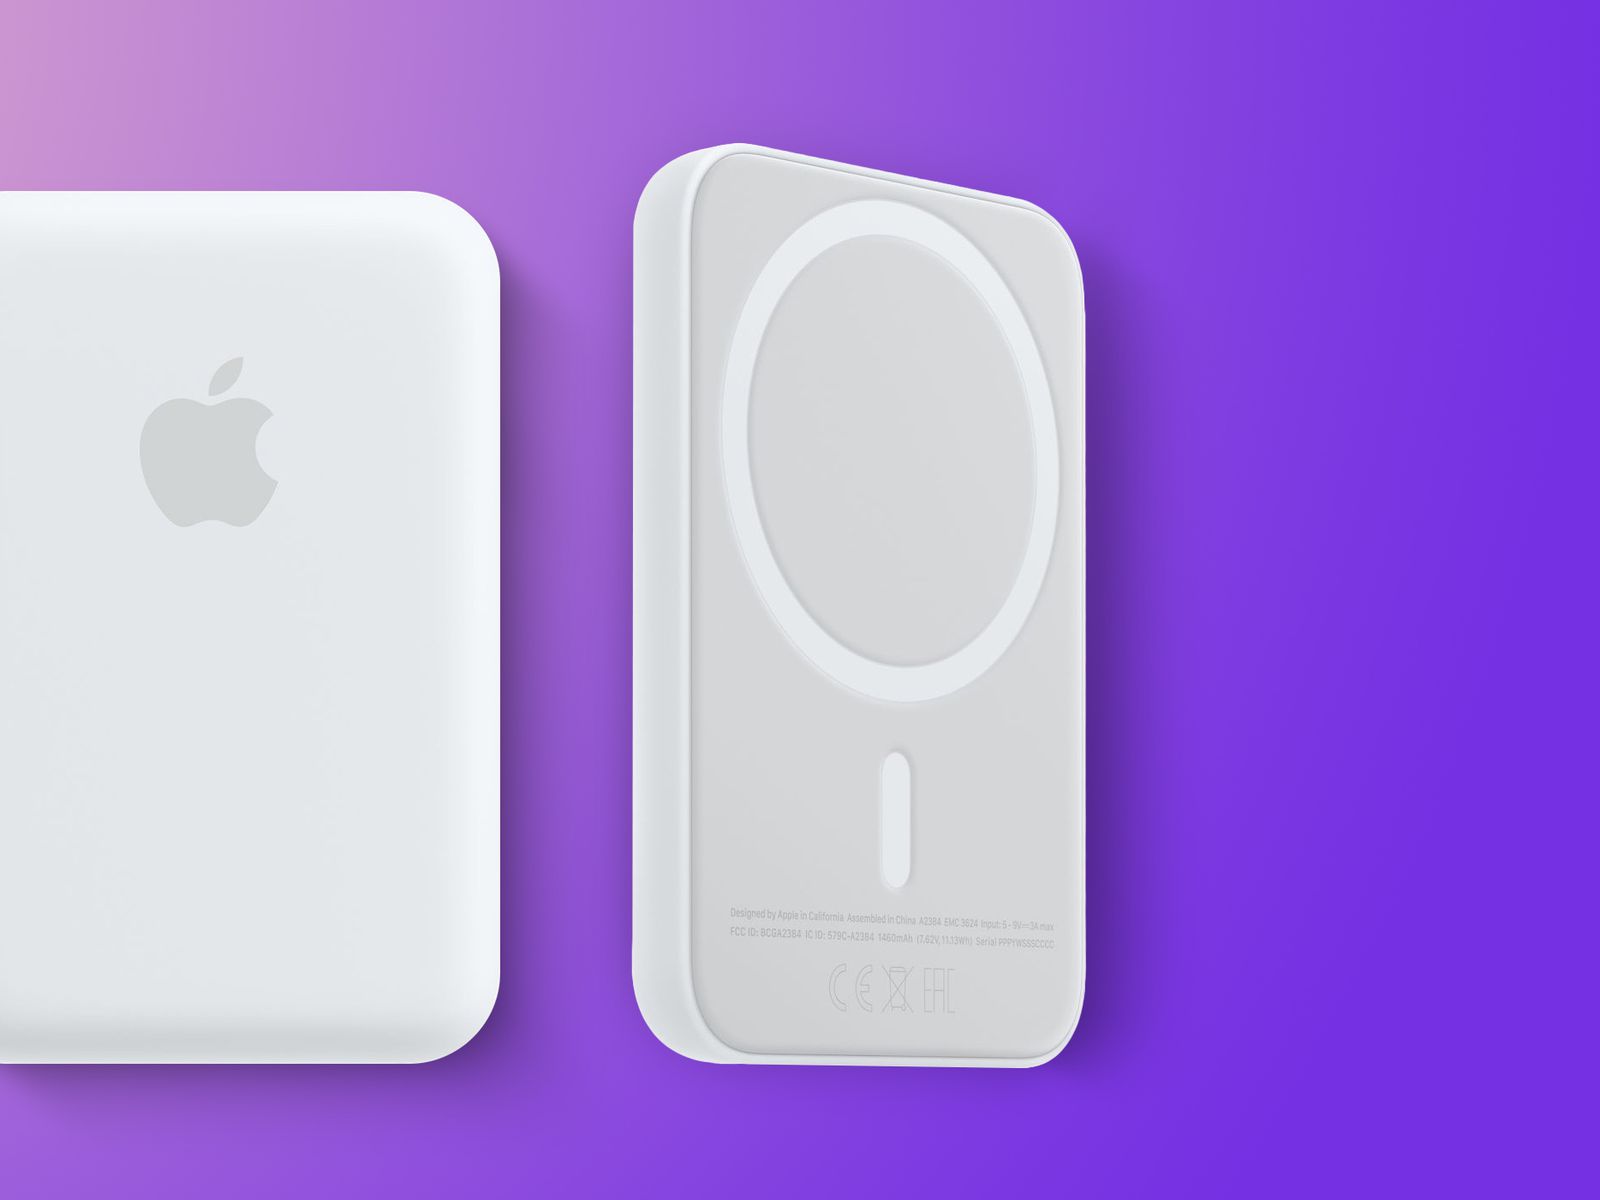 https://images.macrumors.com/t/498EbXcxVji10IuAHV9FTDad6-8=/1600x1200/smart/article-new/2021/07/magsafe-battery-pack-feature2.jpg